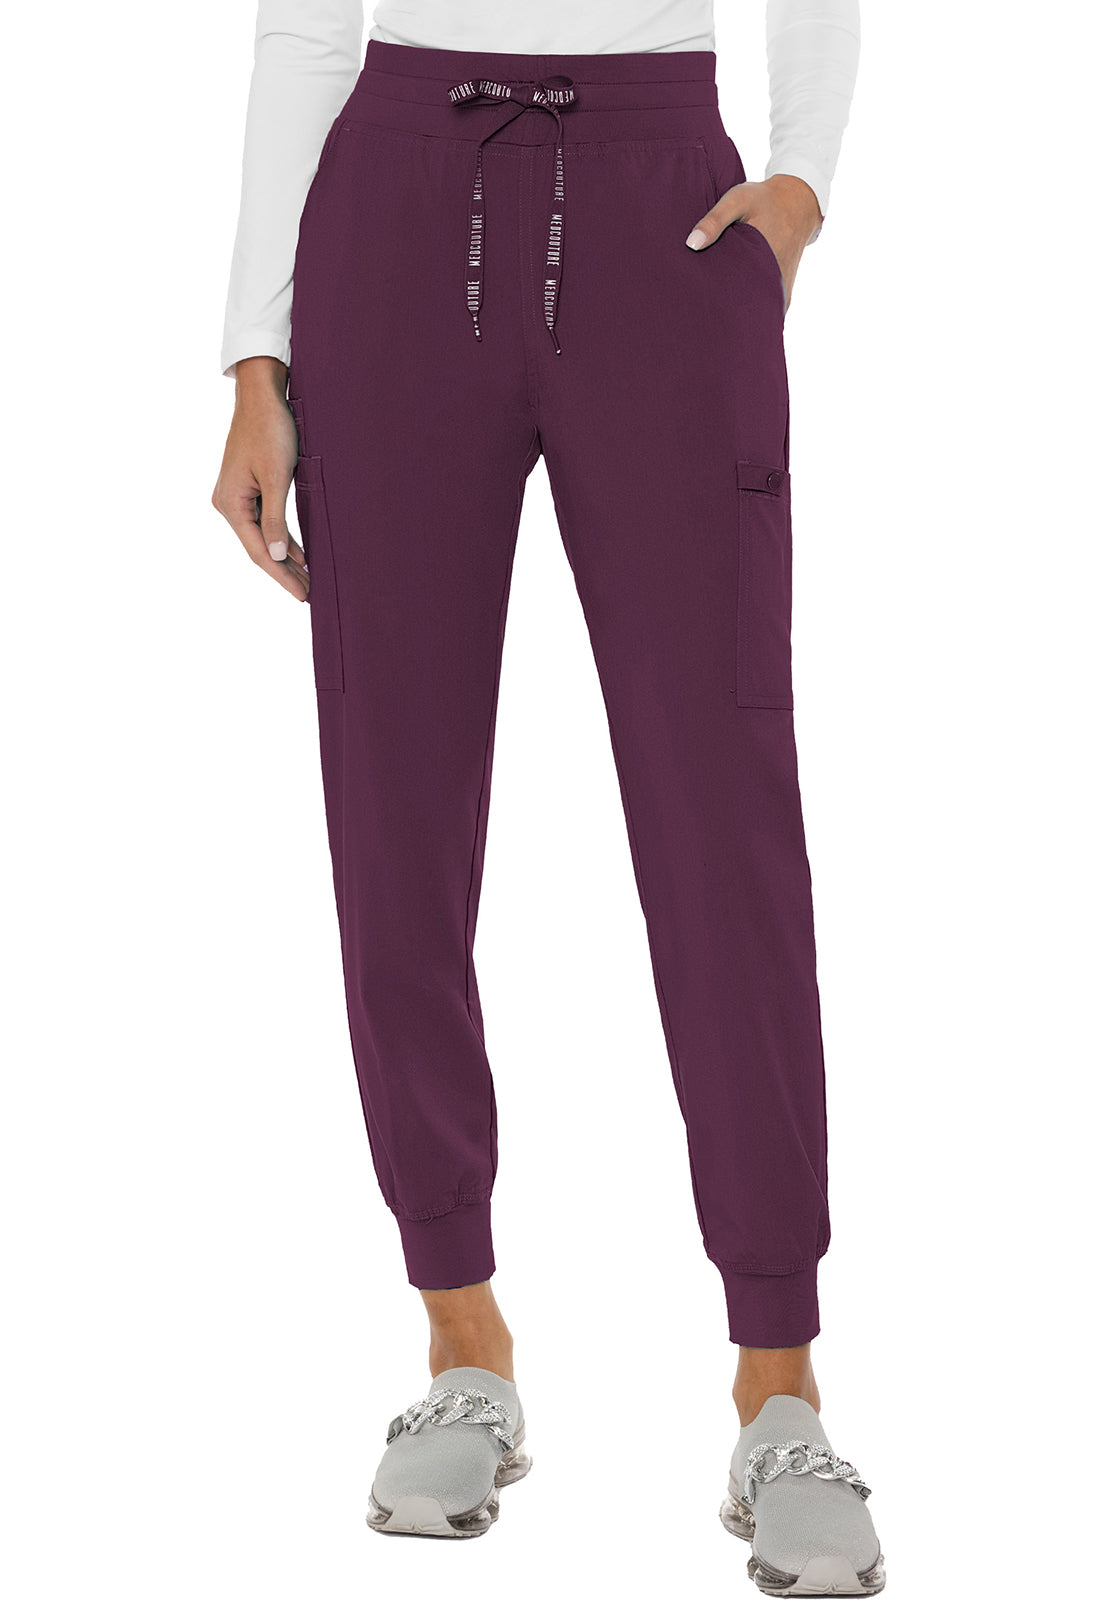 Med Couture Touch 7705 Women's Double Cargo Jogger Pant Wine